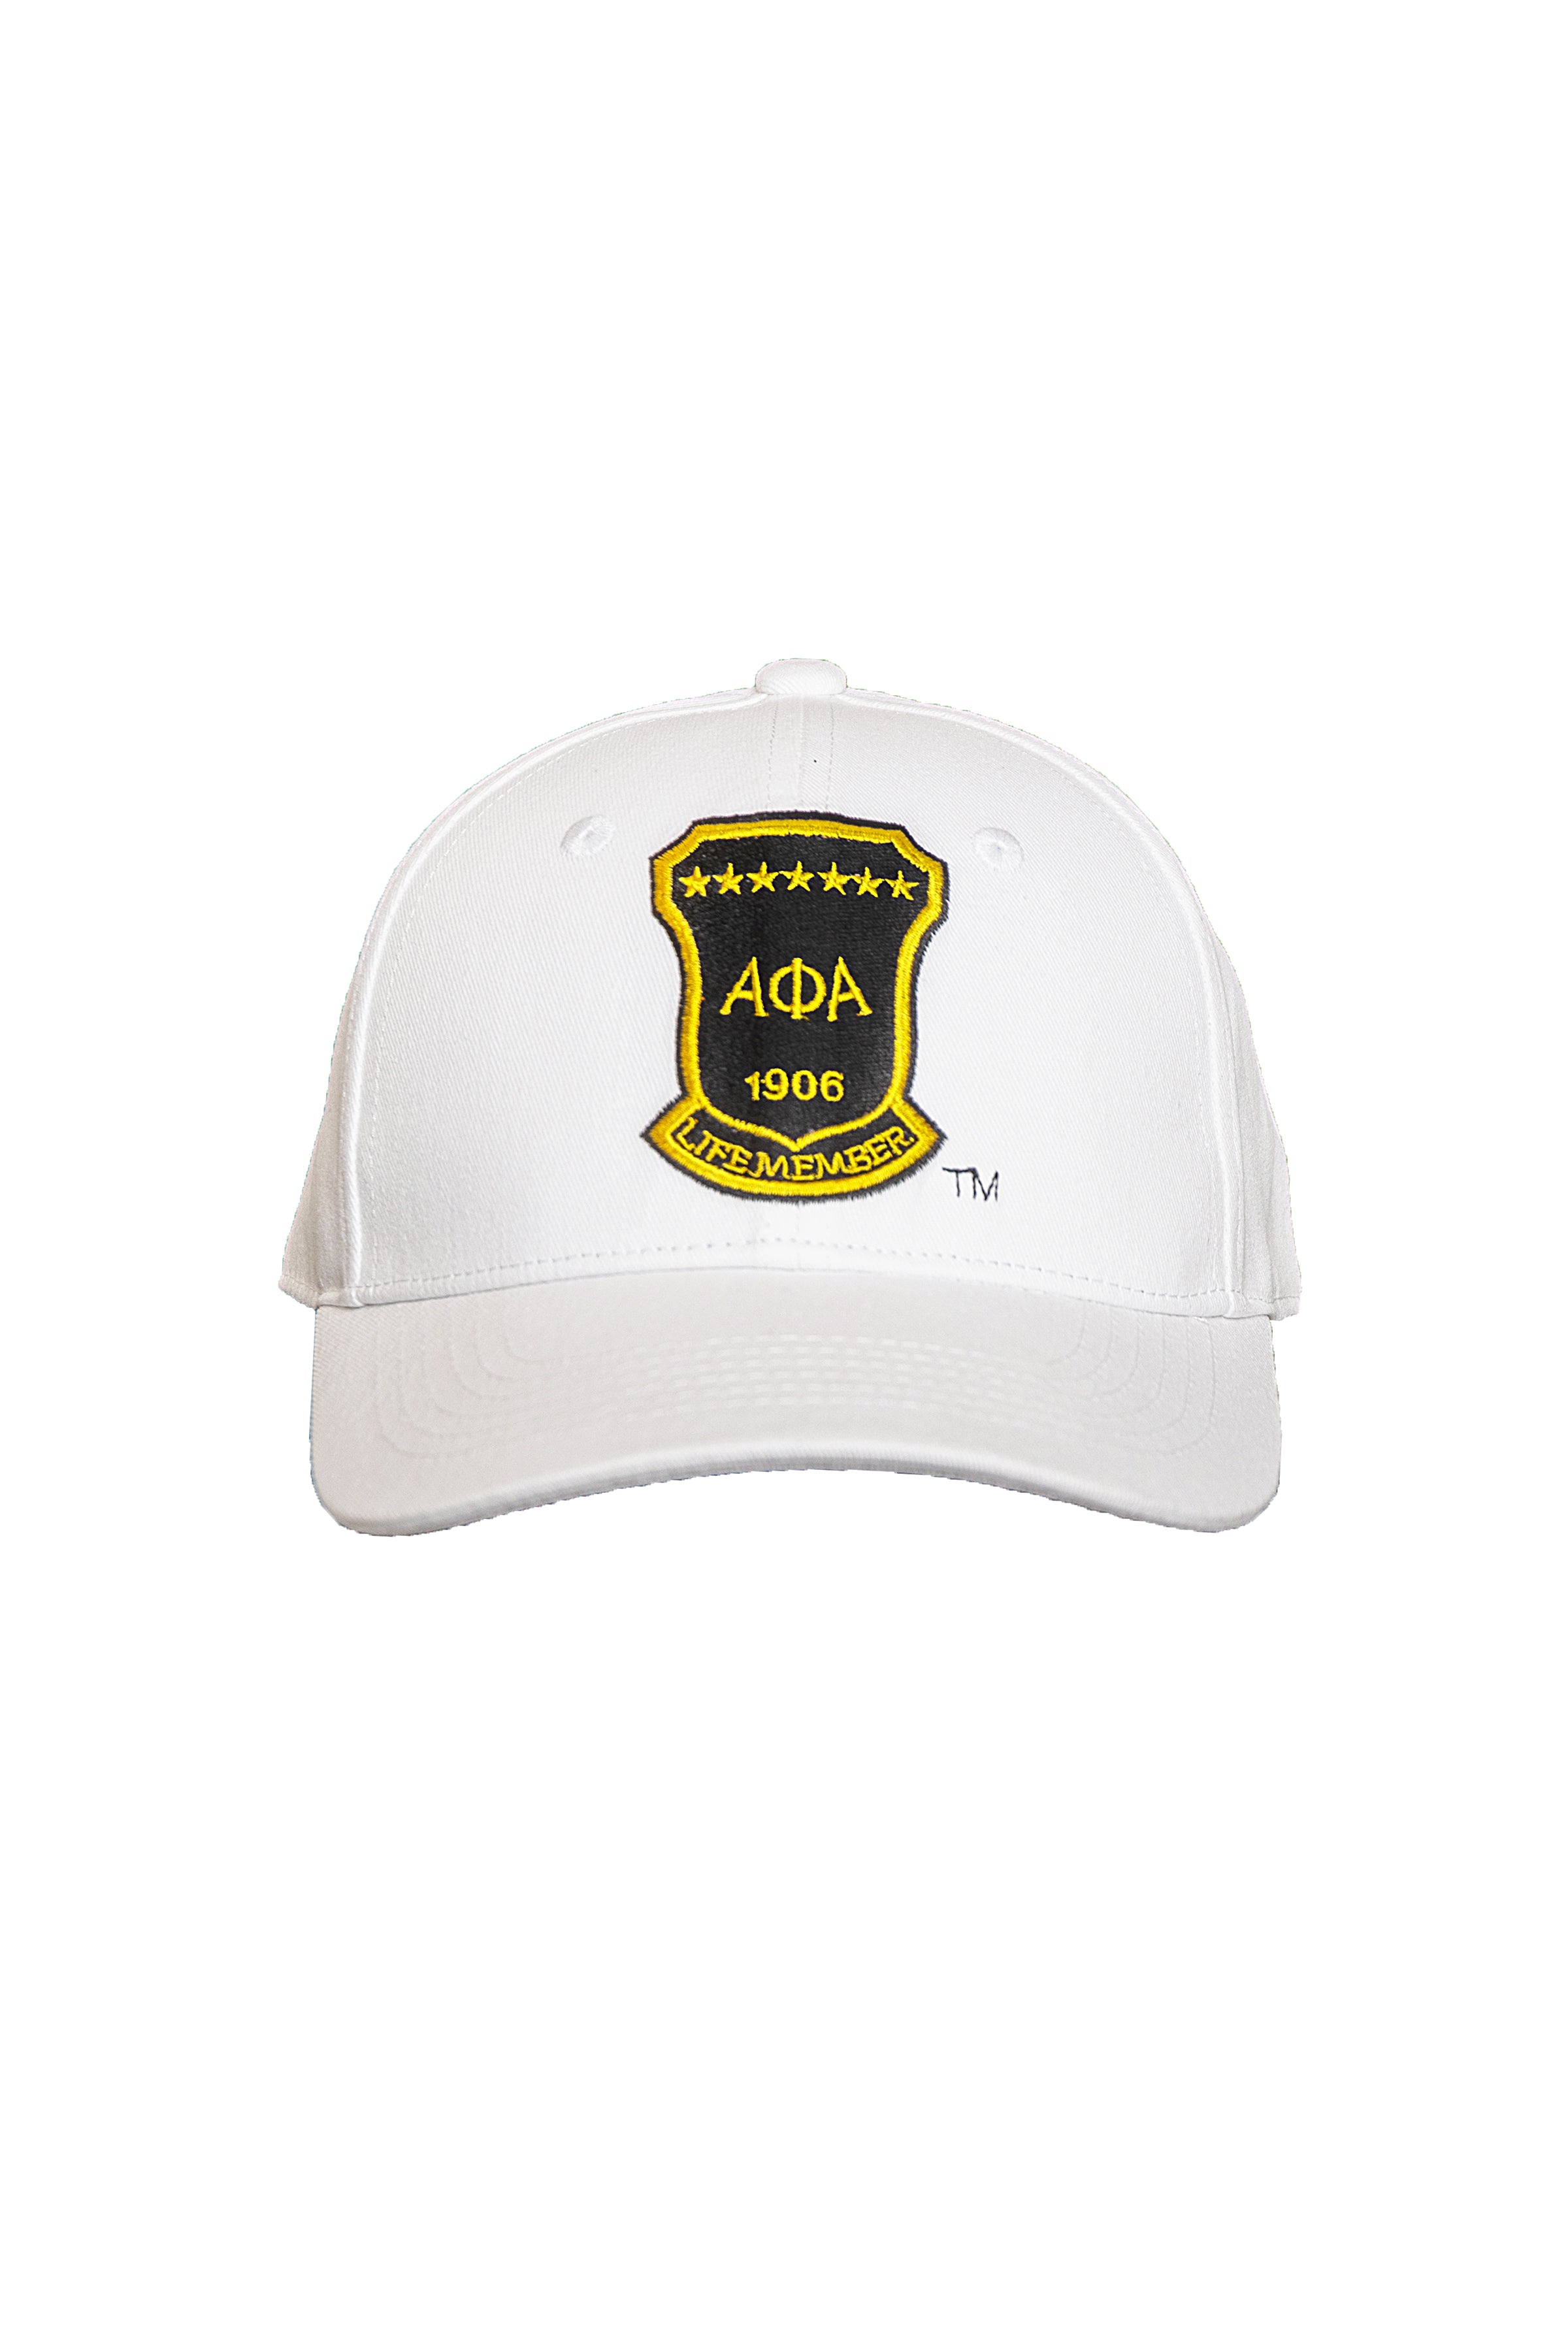 Embroidered Alpha White Life Member Hat – Greek Traditions